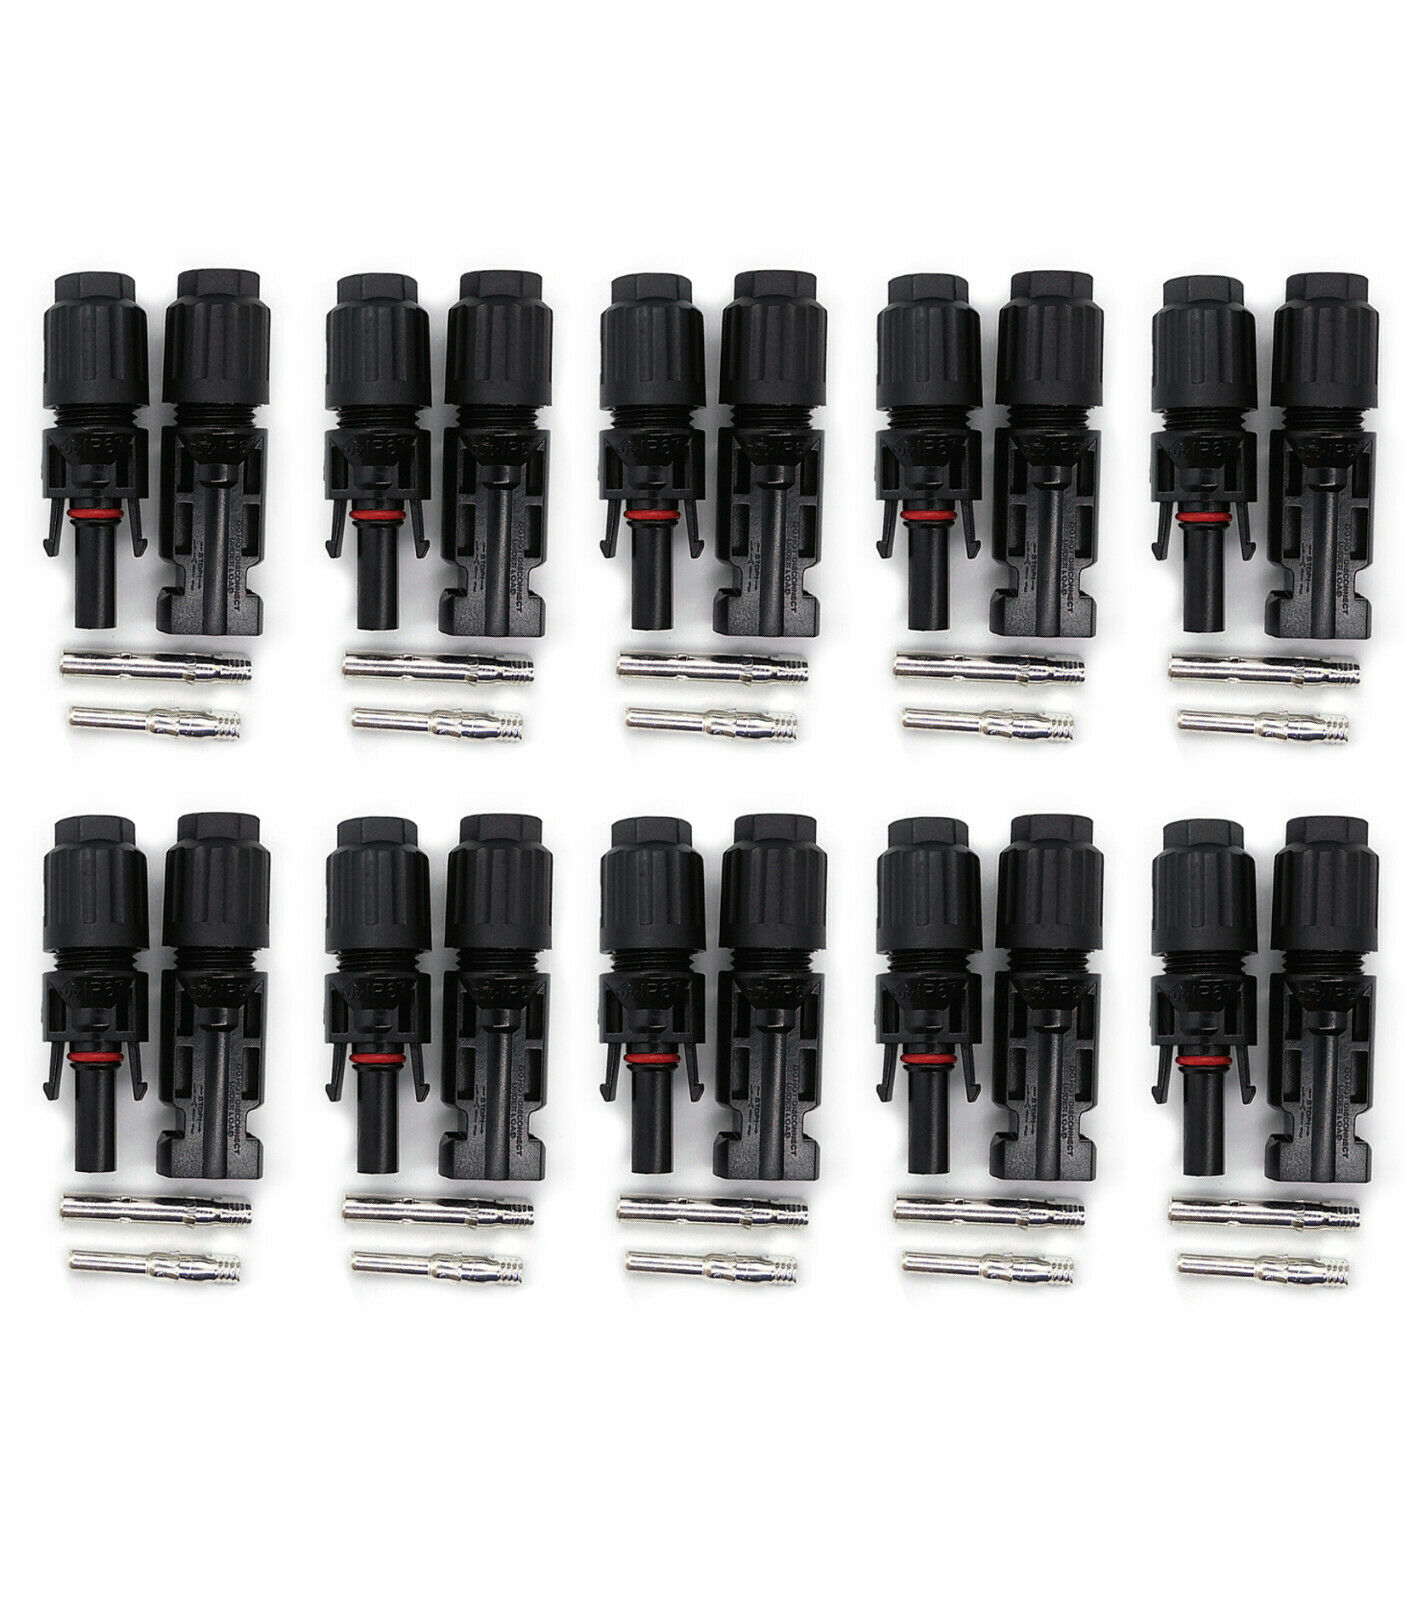 10 Pairs of Solar Panel Cable Connectors Male Female Compatible with MC4